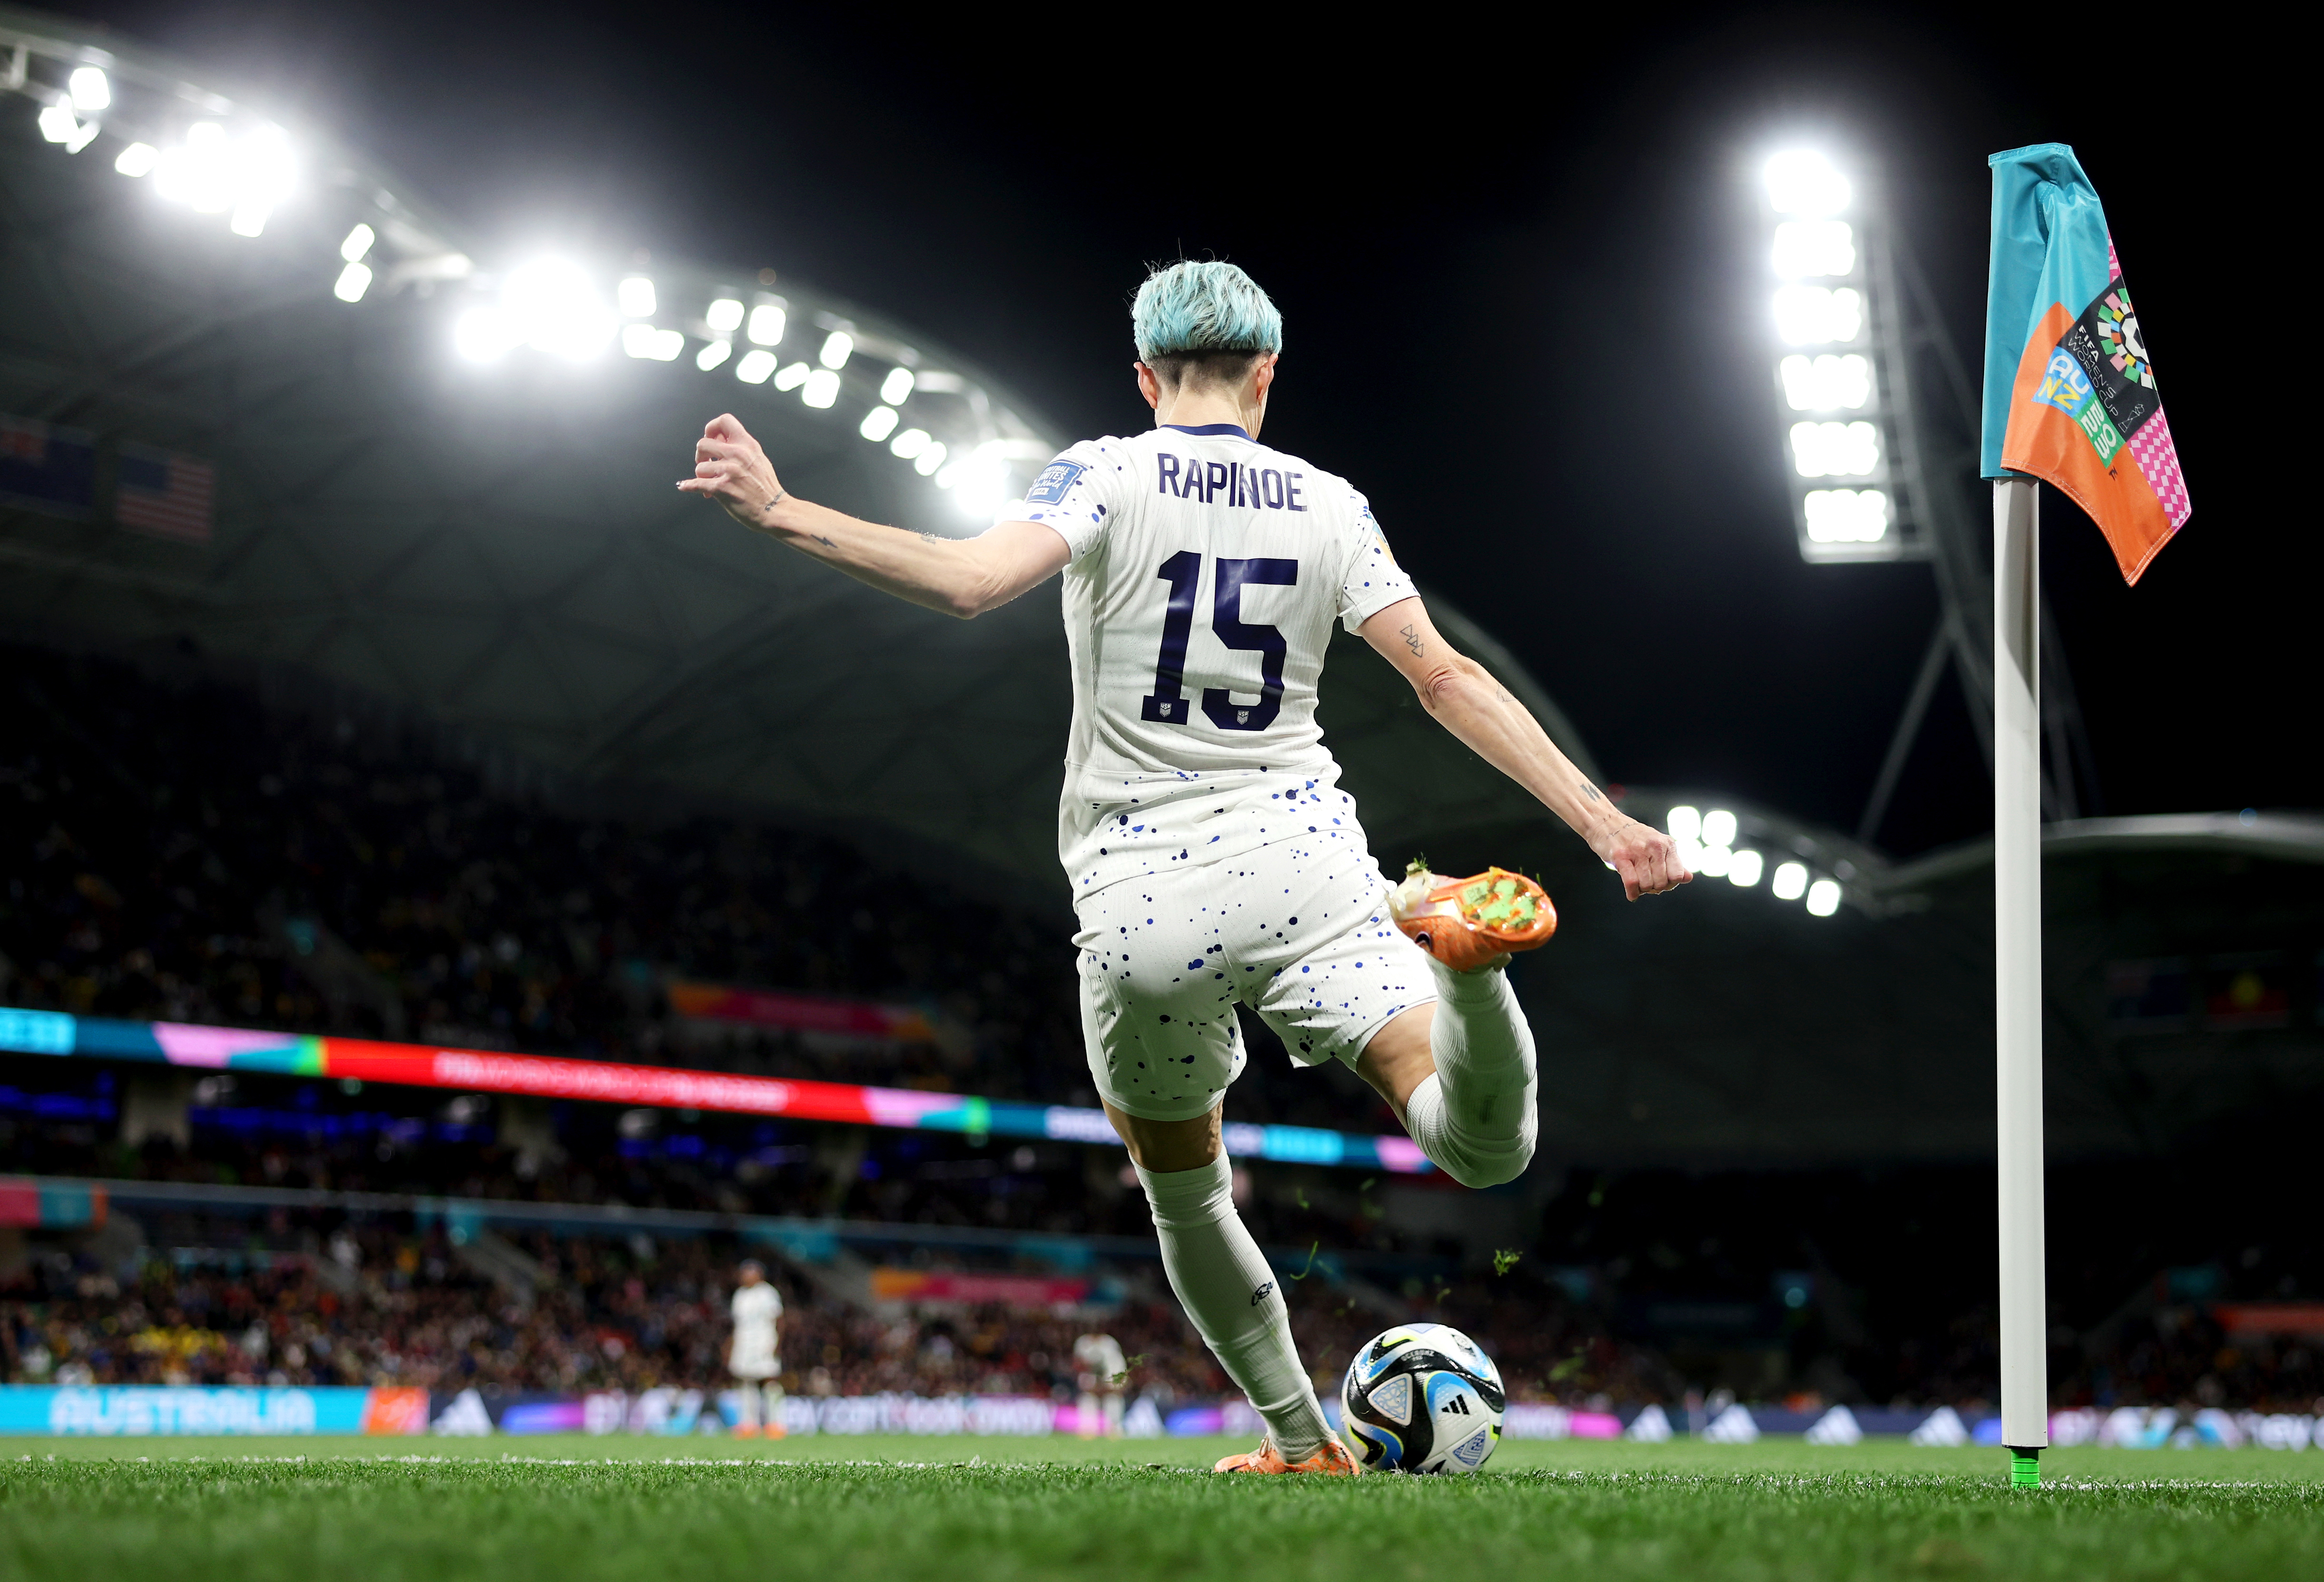 US star Megan Rapinoe, who back in July announced her retirement at the end of the 2023 National Women’s Soccer League (NWSL) season, takes a corner kick against Sweden. It is likely her final World Cup match ever.